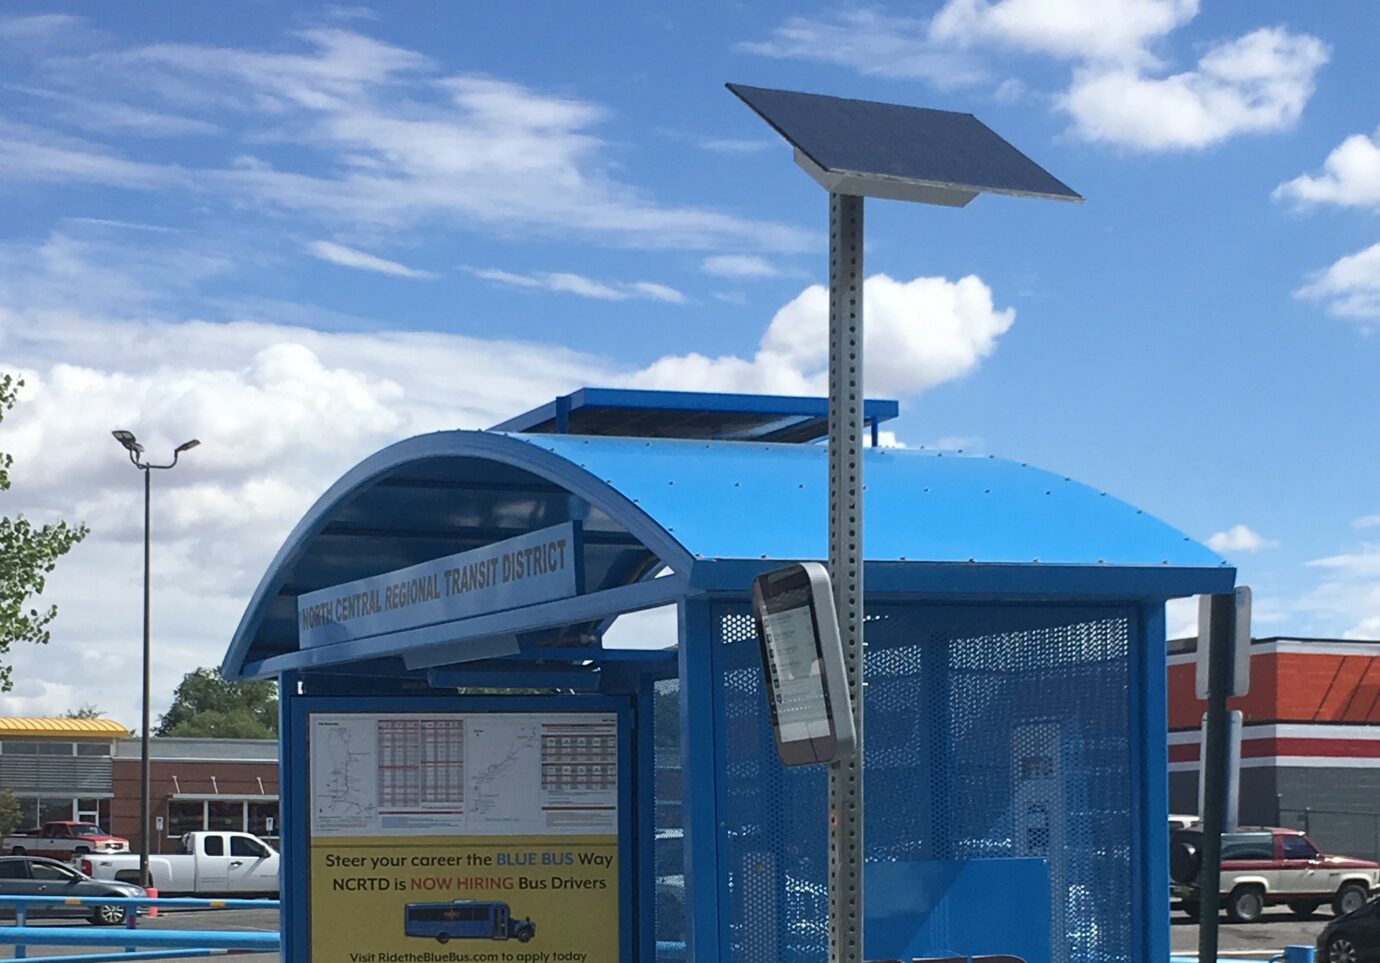 Connectpoint 13" Digital Bus Stop installed at RTD shelter